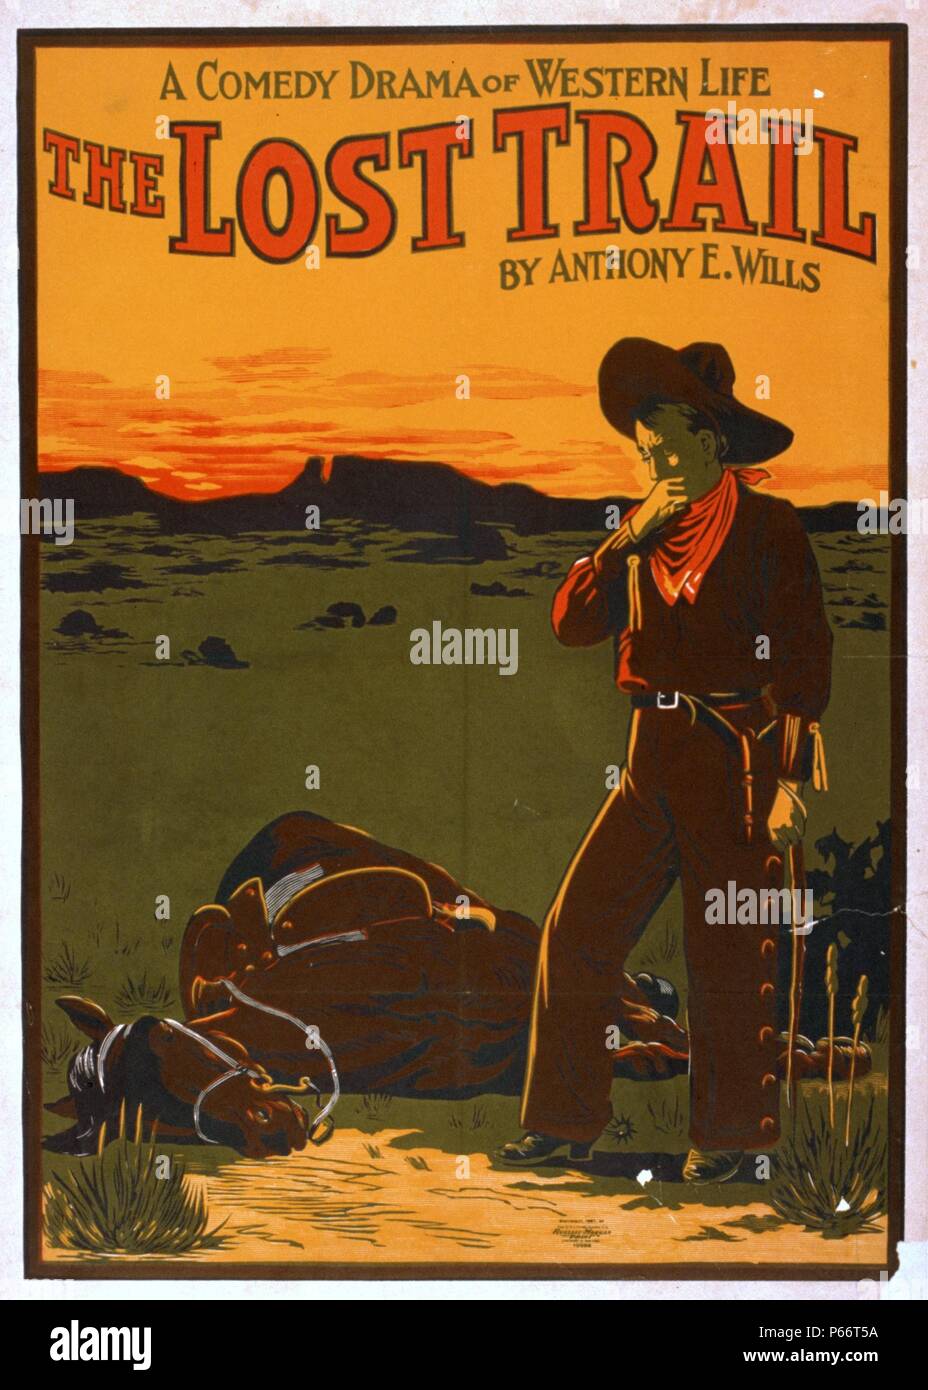 The Lost trail. comedy drama of western life, The lost trail by Anthony E. Wills. c1907. Stock Photo